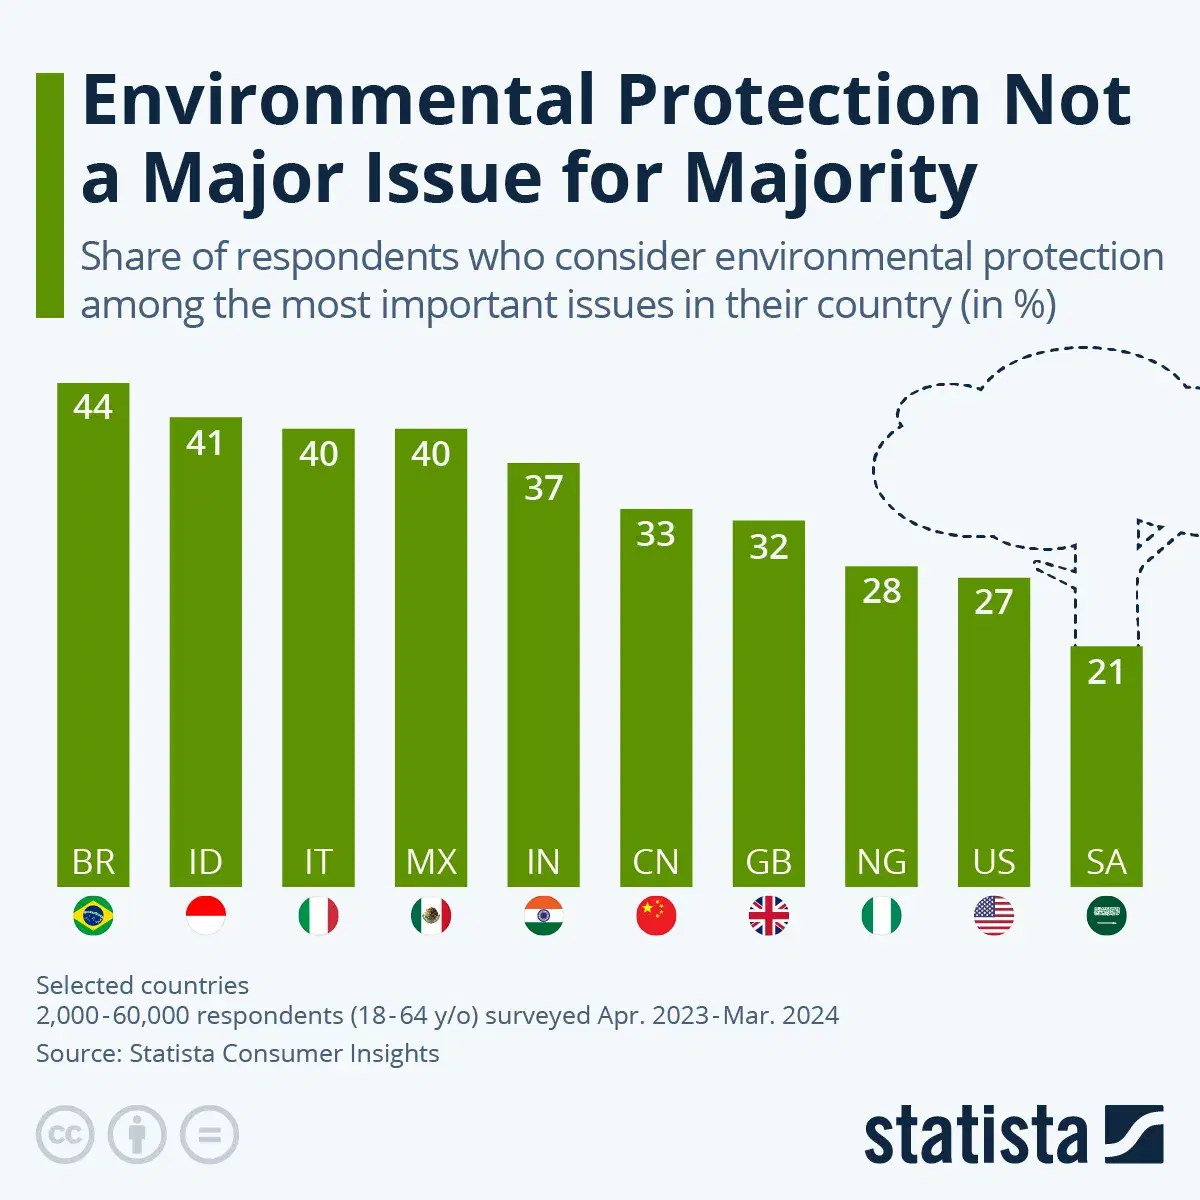 Environmental Protection Not a Major Issue for Majority